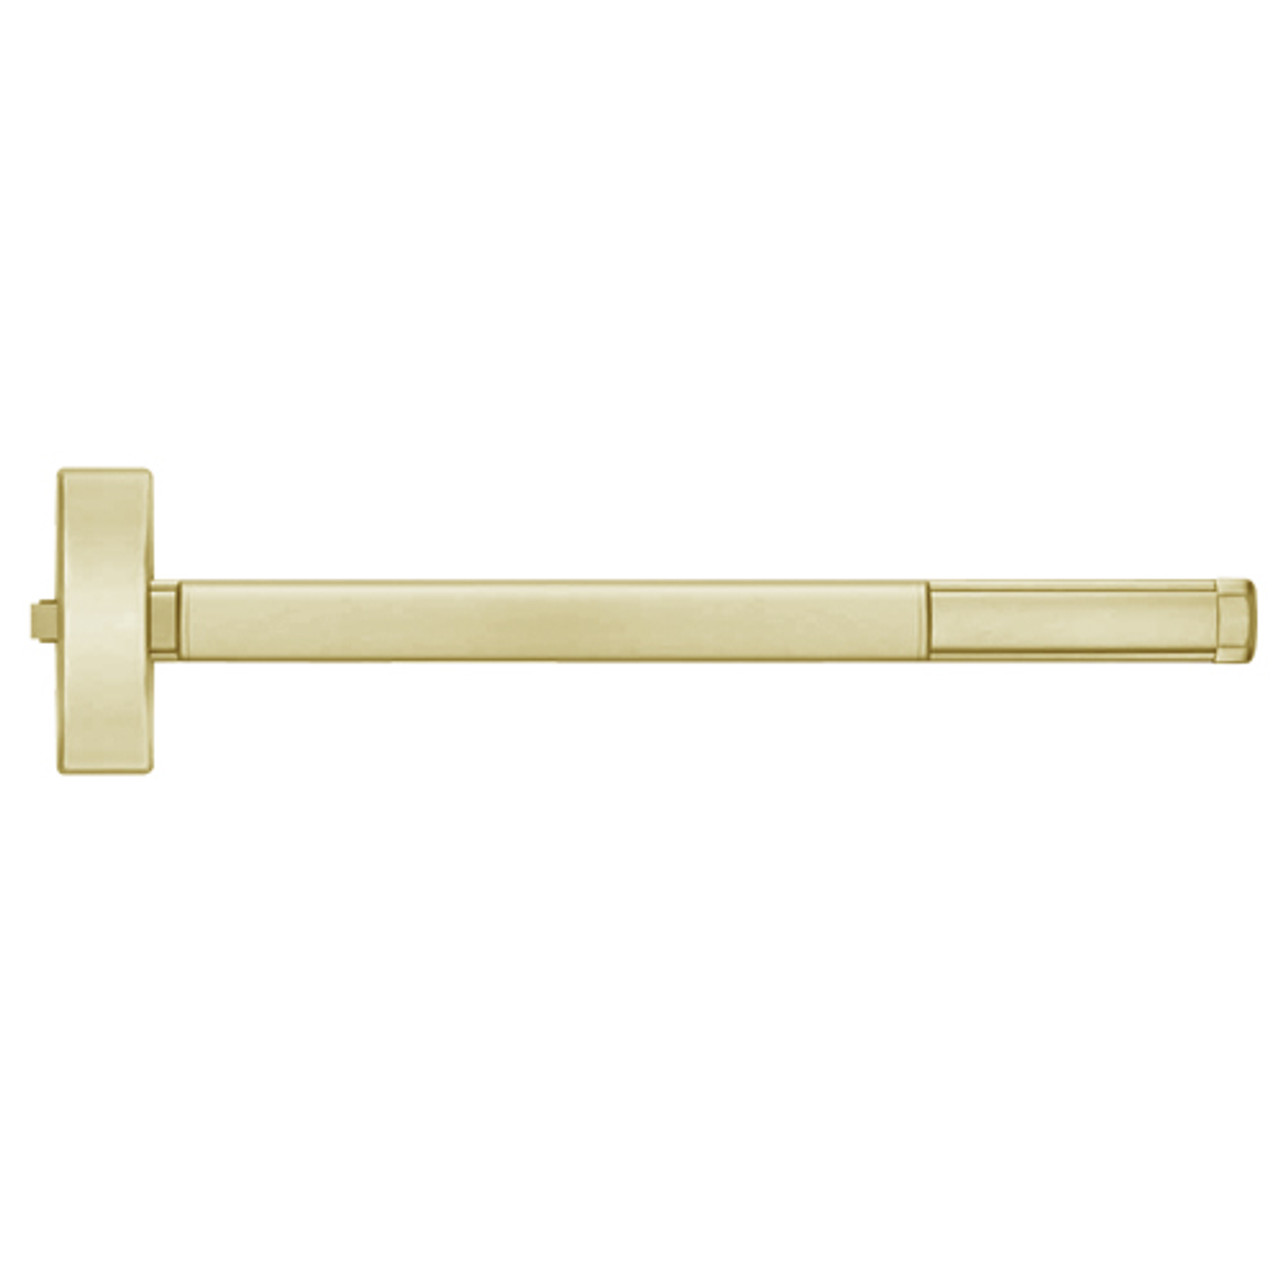 DEFL2114-606-48 PHI 2100 Series Fire Rated Apex Rim Exit Device with Delayed Egress Prepped for Lever-Knob Always Active in Satin Brass Finish